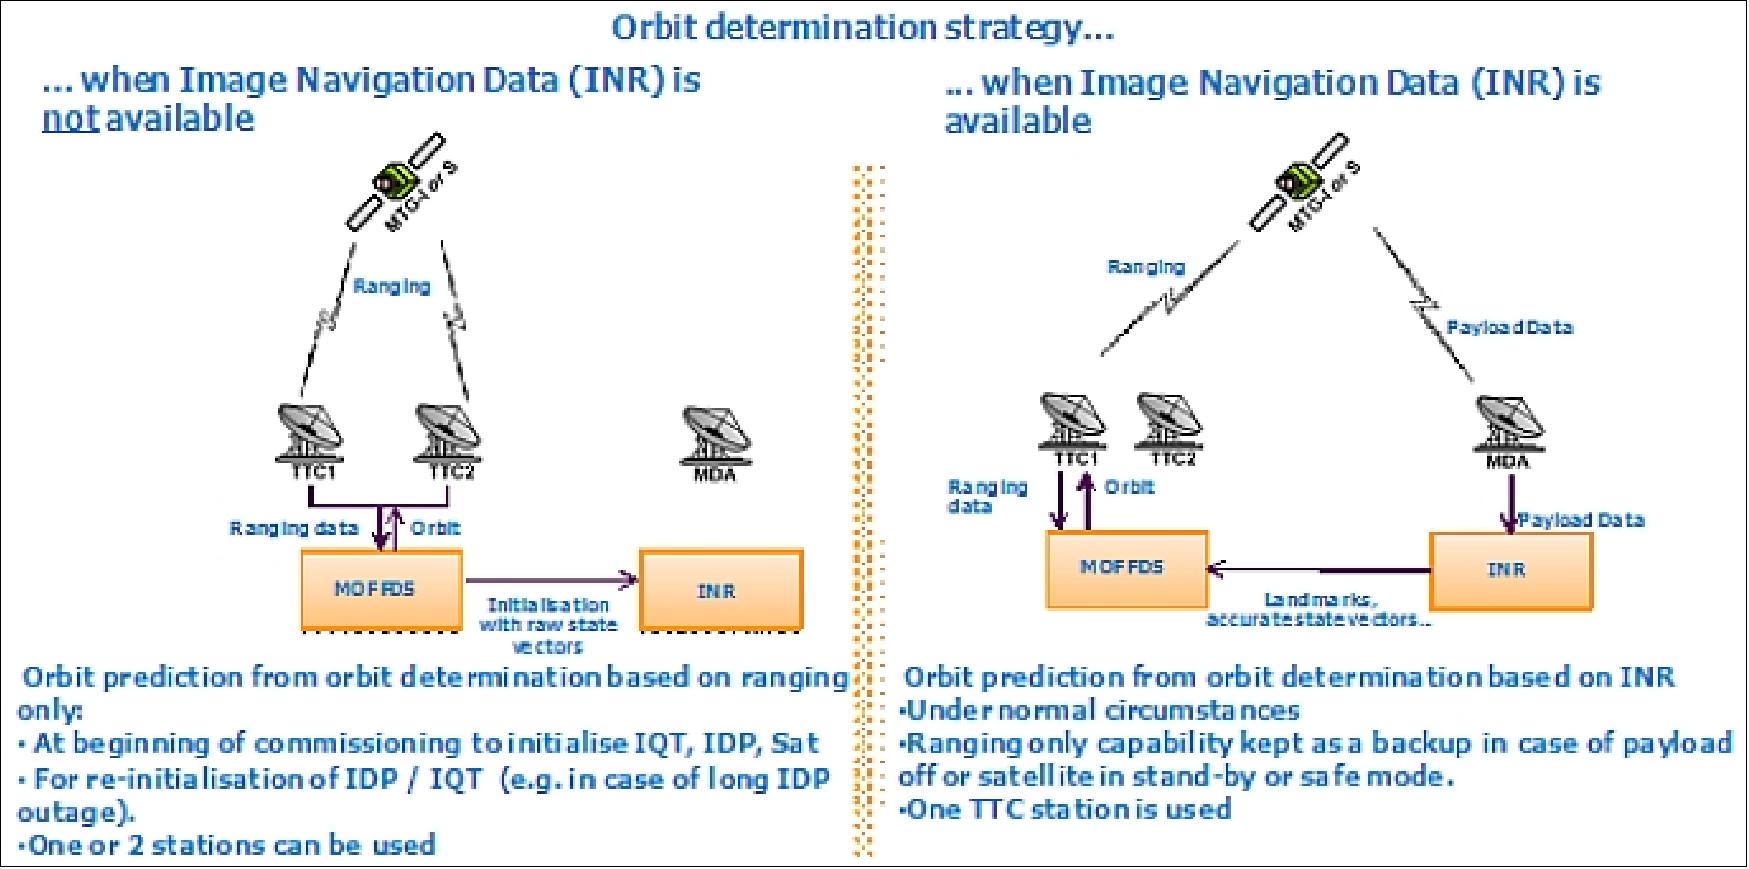 Figure 2: Orbit determination strategy with and without INR (image credit: EUMETSAT)